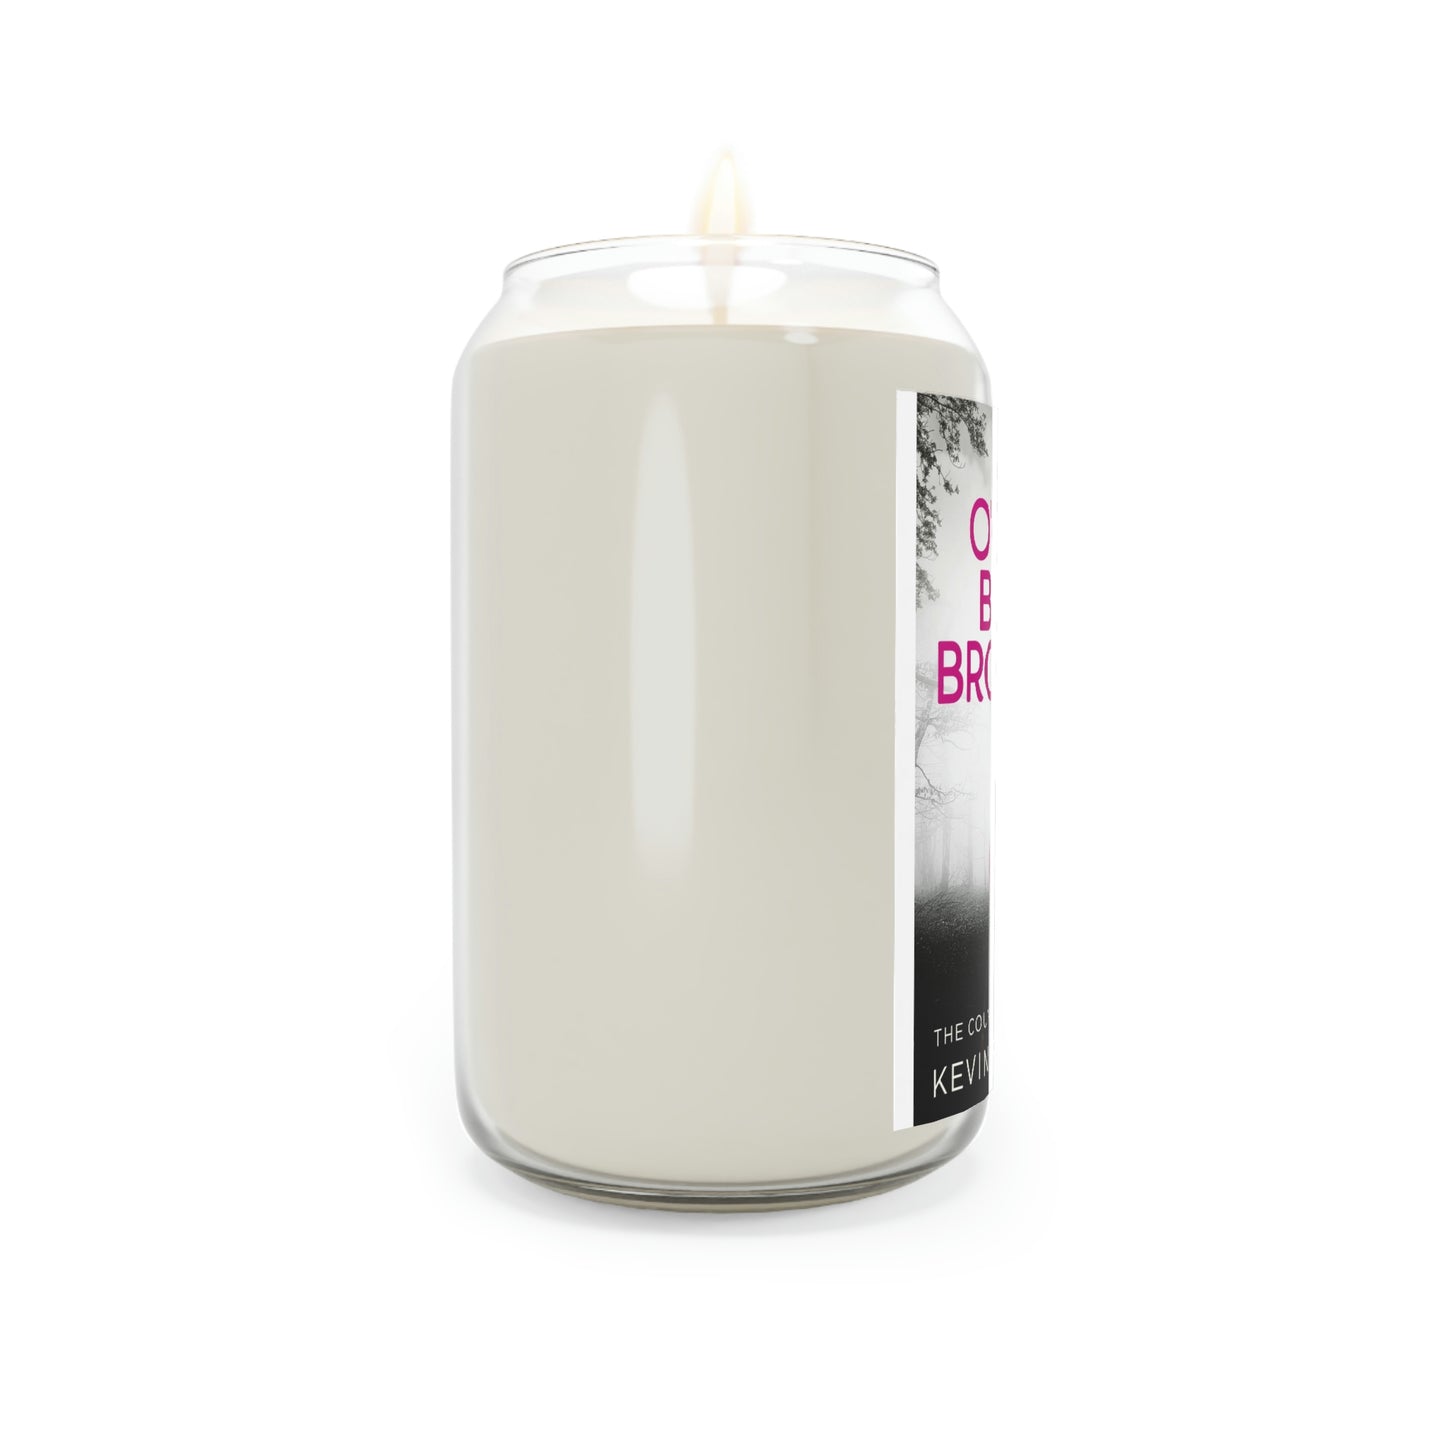 Nine O'Clock Bus To Brompton - Scented Candle